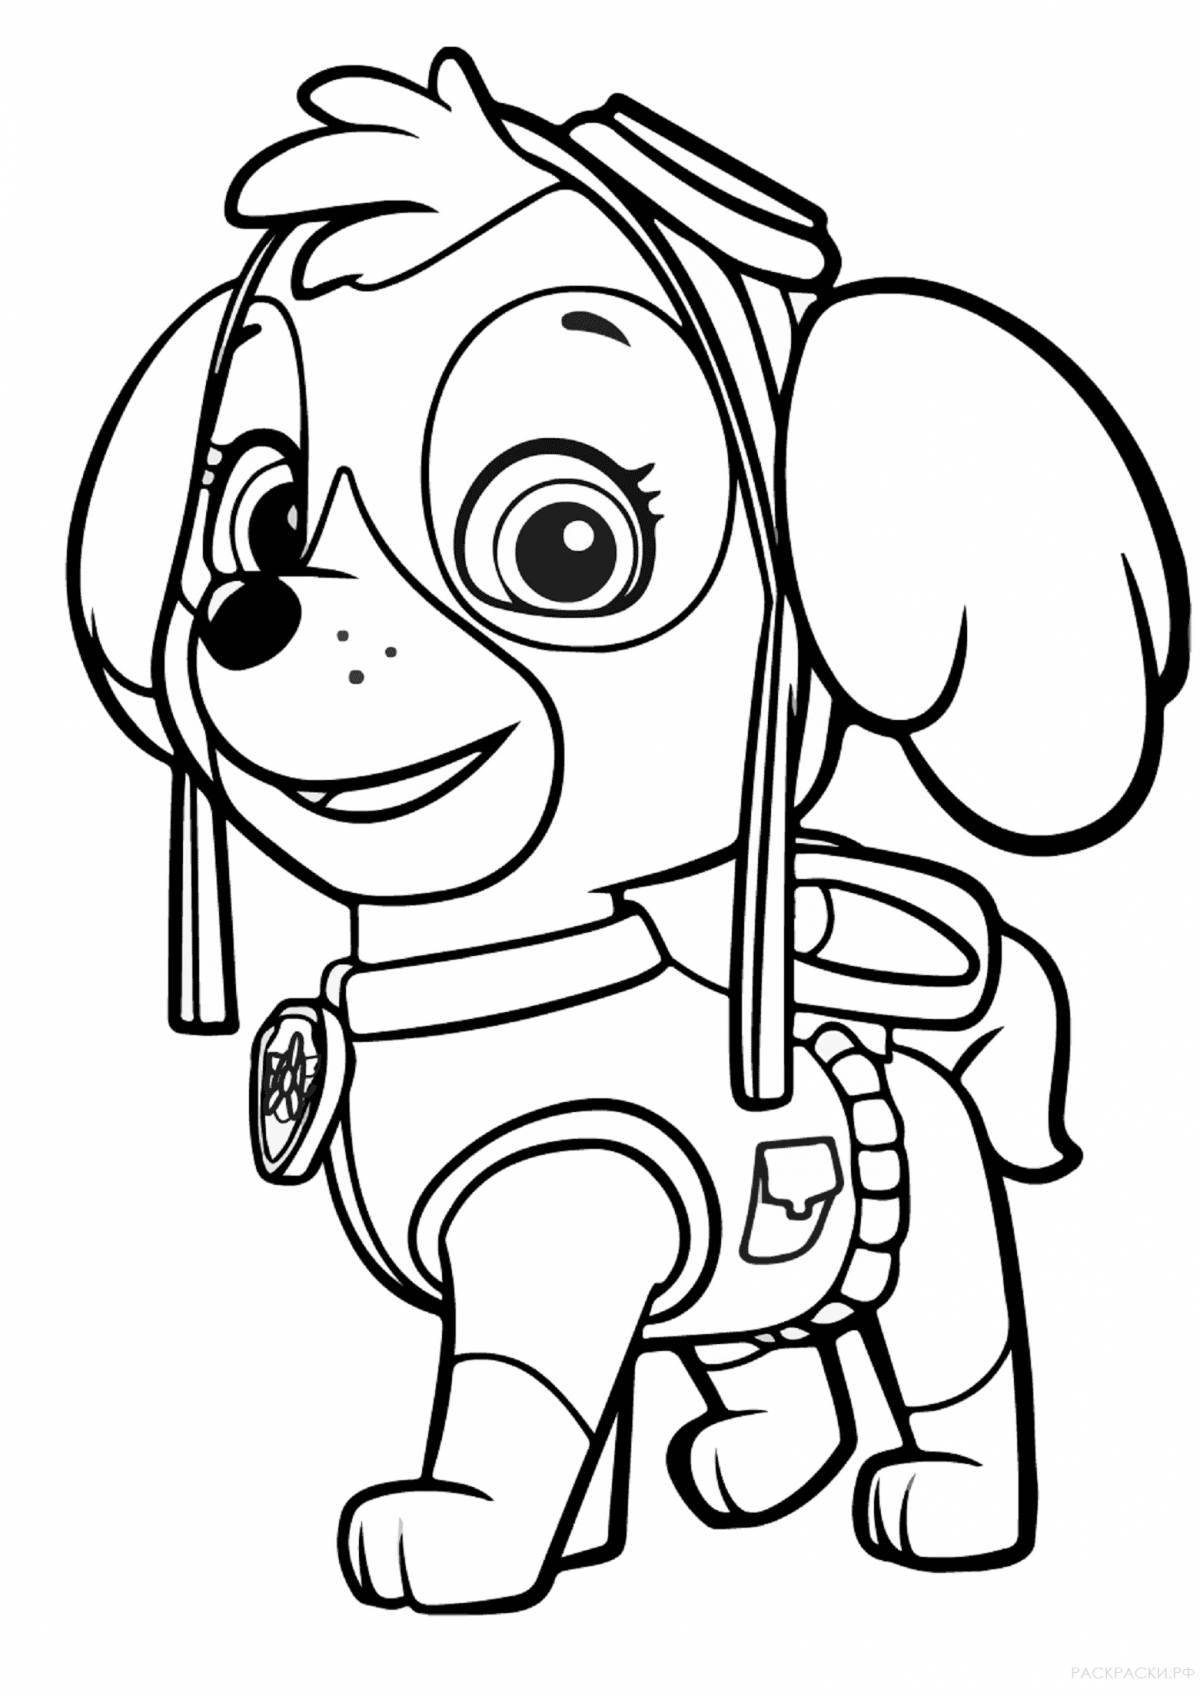 Funny paw patrol coloring pages for boys